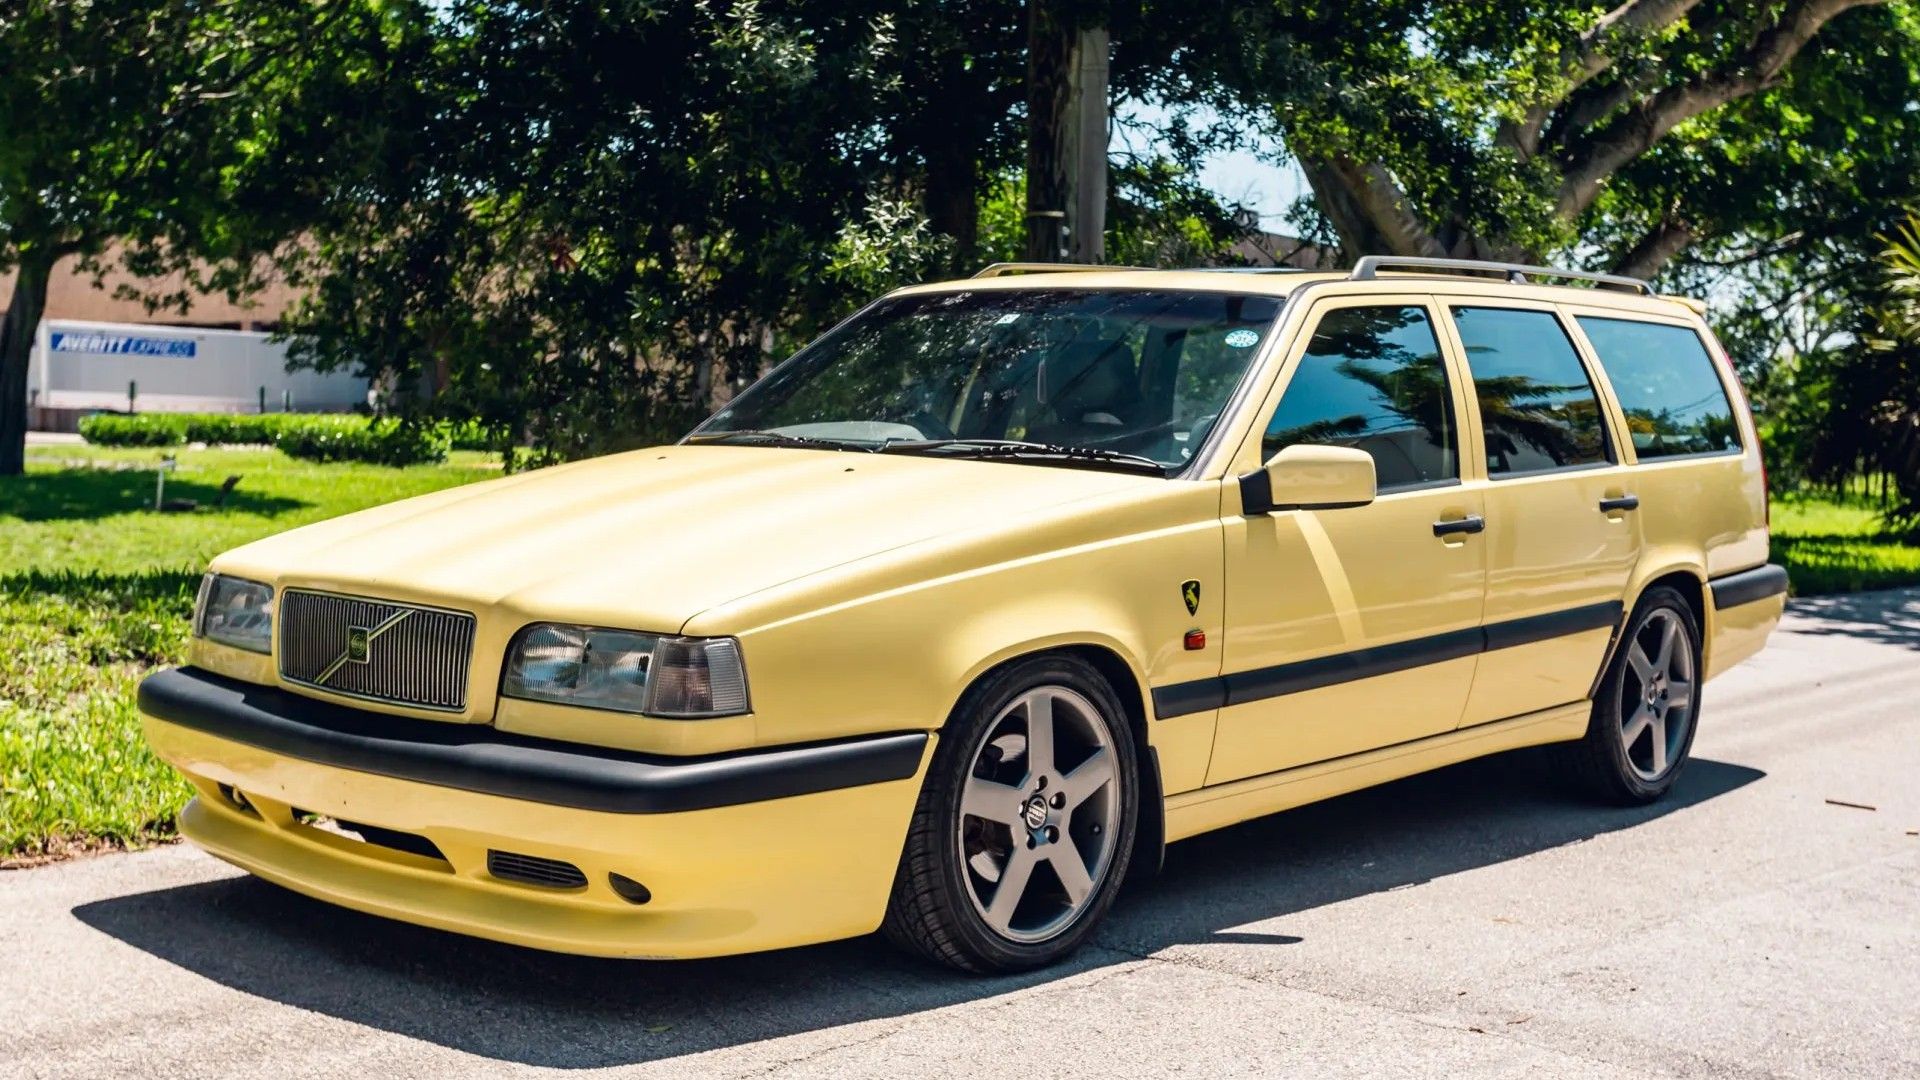 Front 3/4 shot of a Volvo 850 T5-R Wagon